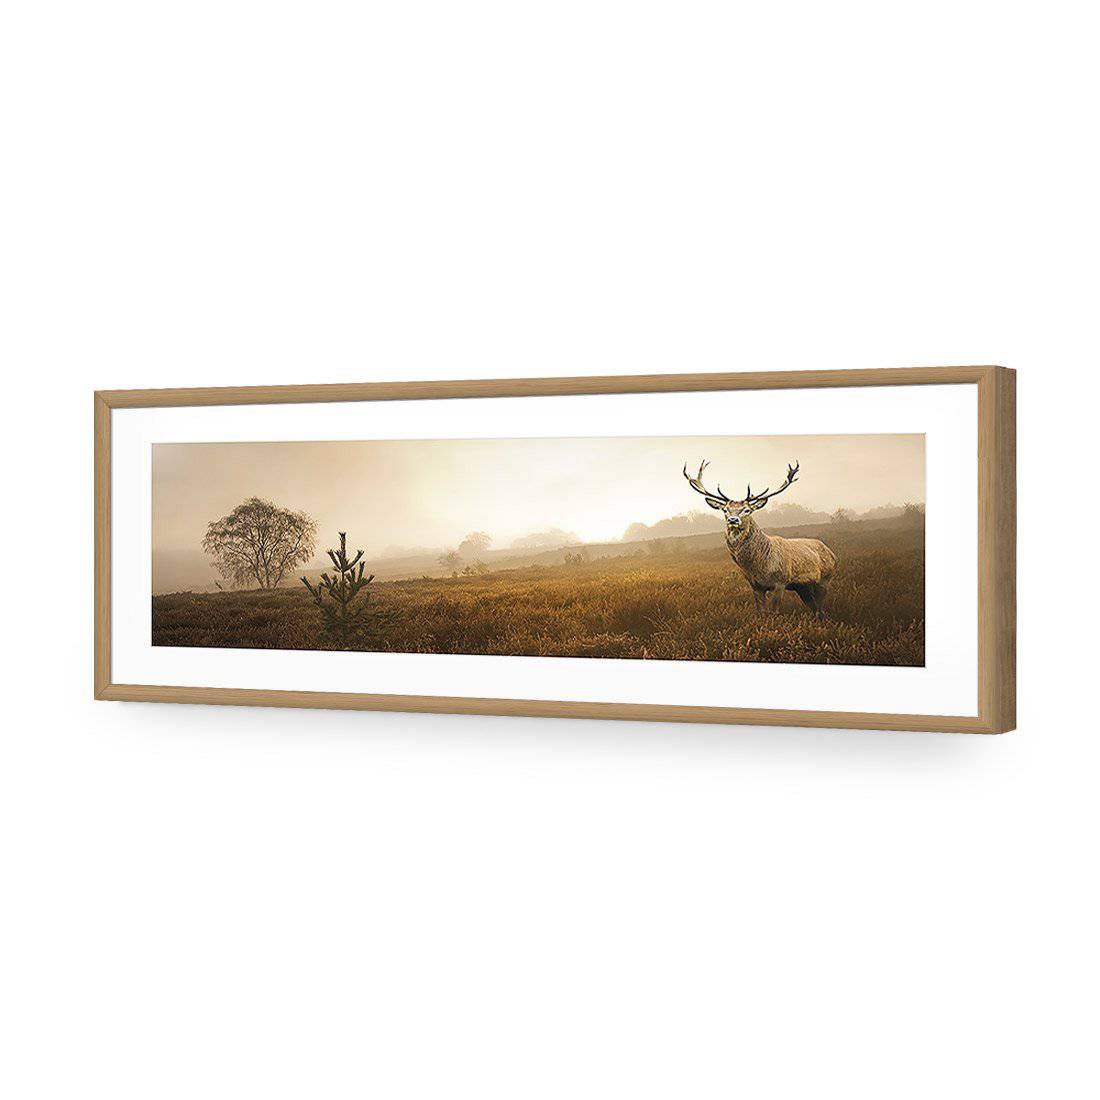 Morning Stag, Long-Acrylic-Wall Art Design-With Border-Acrylic - Oak Frame-60x20cm-Wall Art Designs